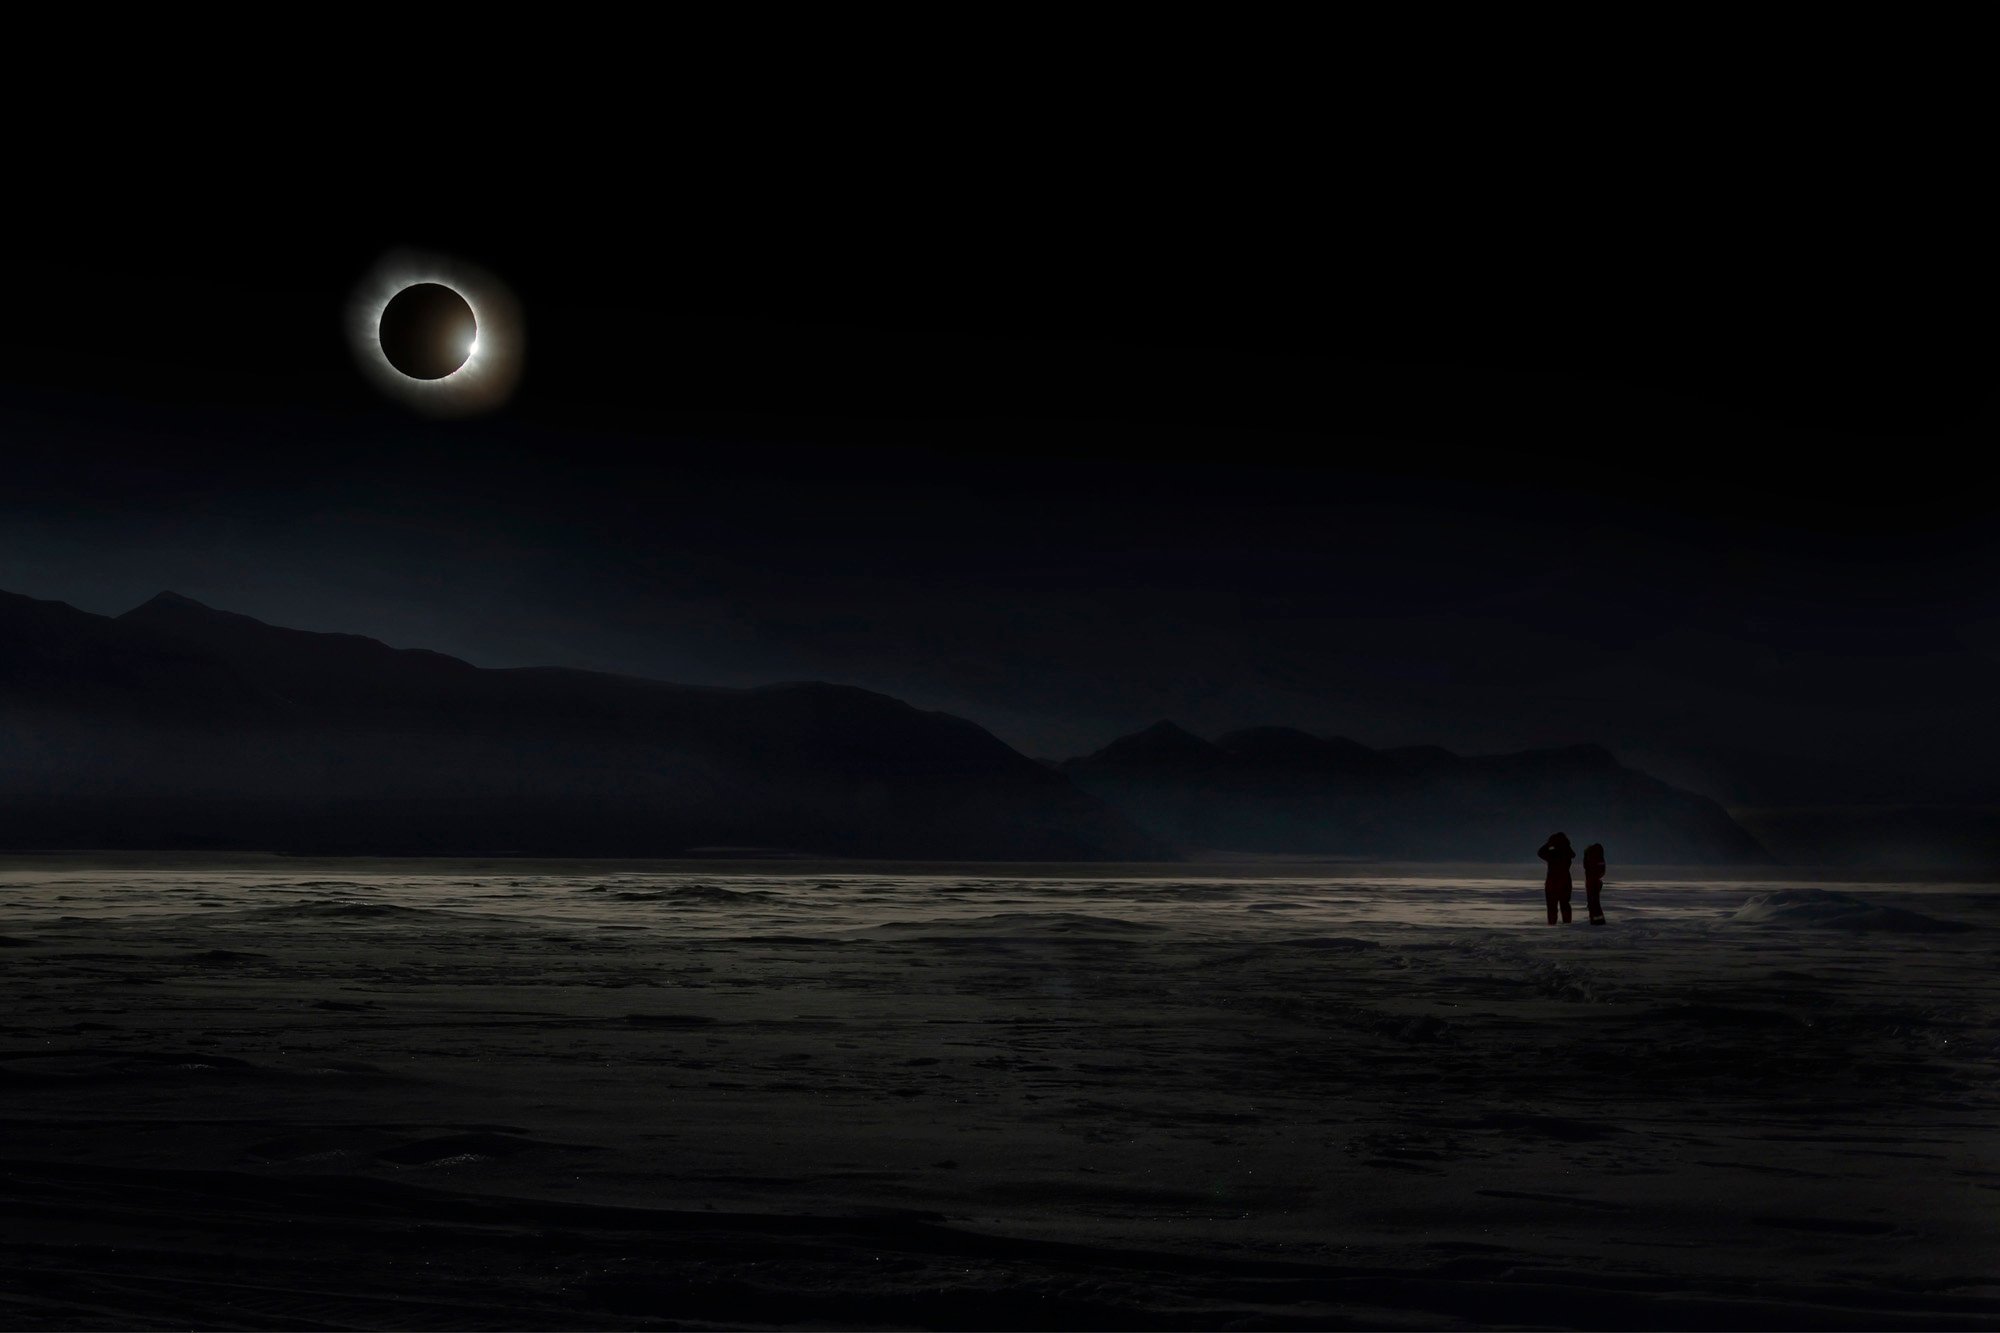 "The total solar eclipse in Svalbard on March 20, 2015 was one of the most importa nt and impressive astronomical events." Image: Vladimir Alekseev/www.tpoty.com